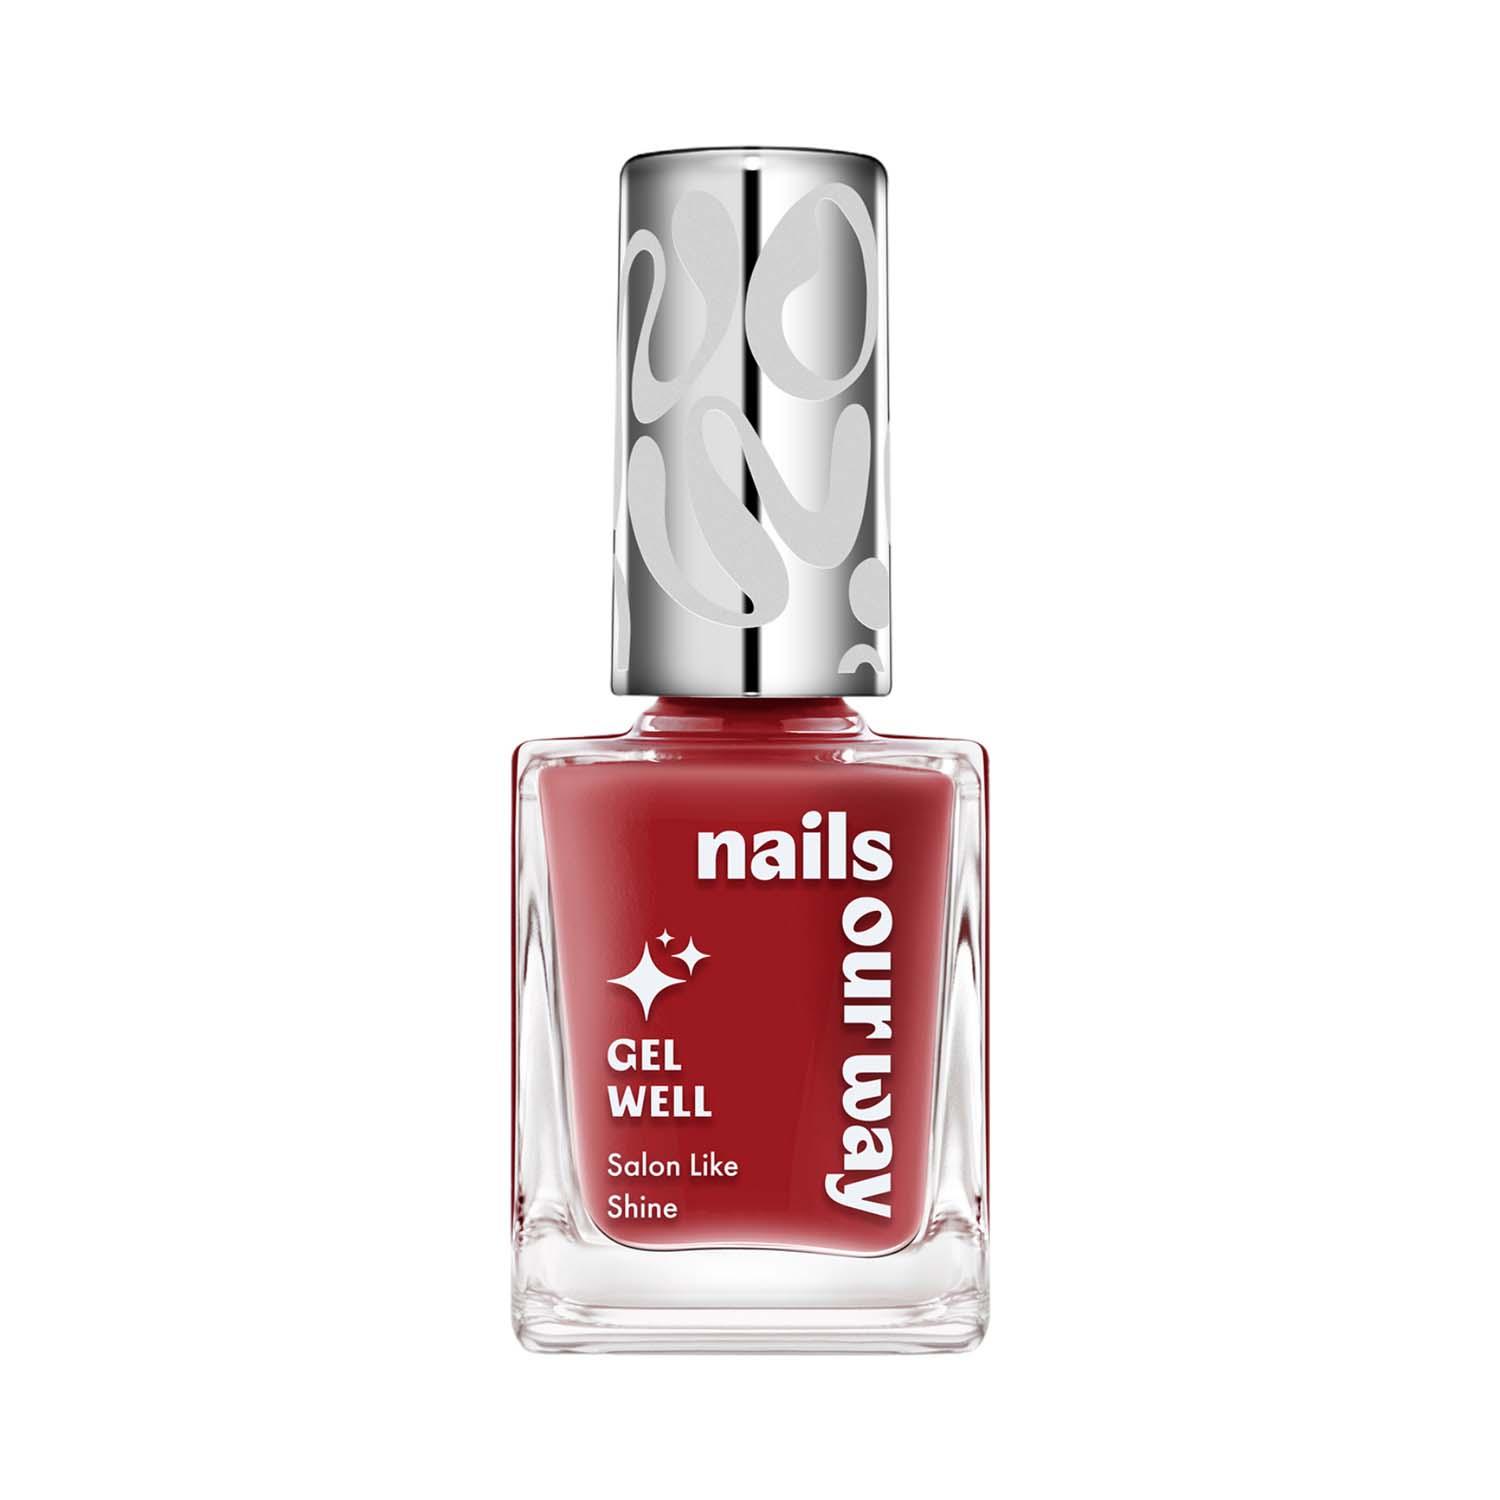 Nails Our Way | Nails Our Way Gel Well Nail Enamel - 105 Supreme (10 ml)